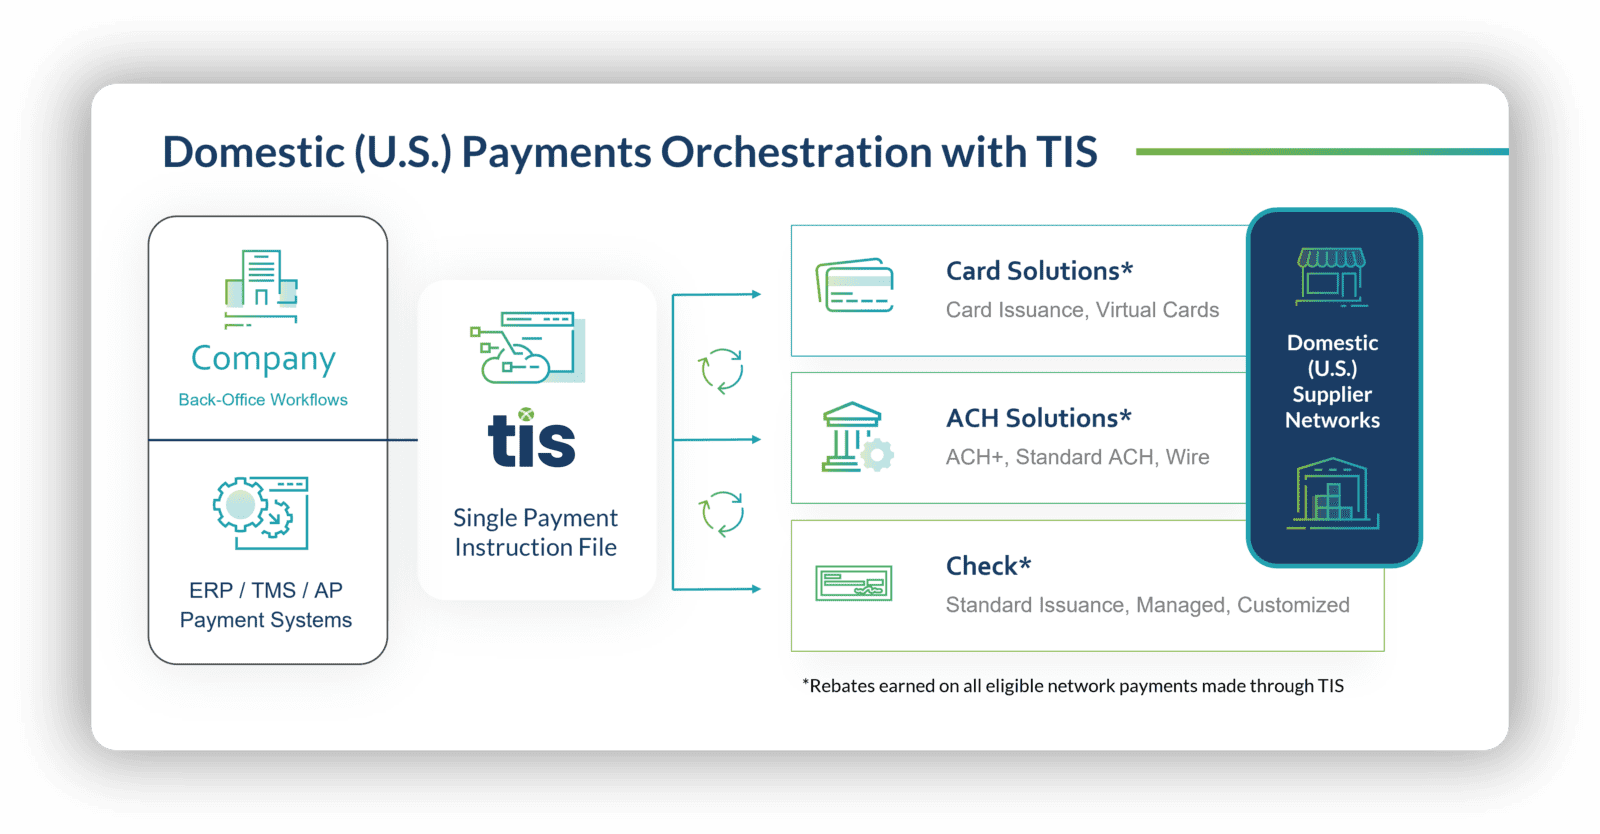 How TIS helps companies streamline domestic ACH, check, and card payments. 